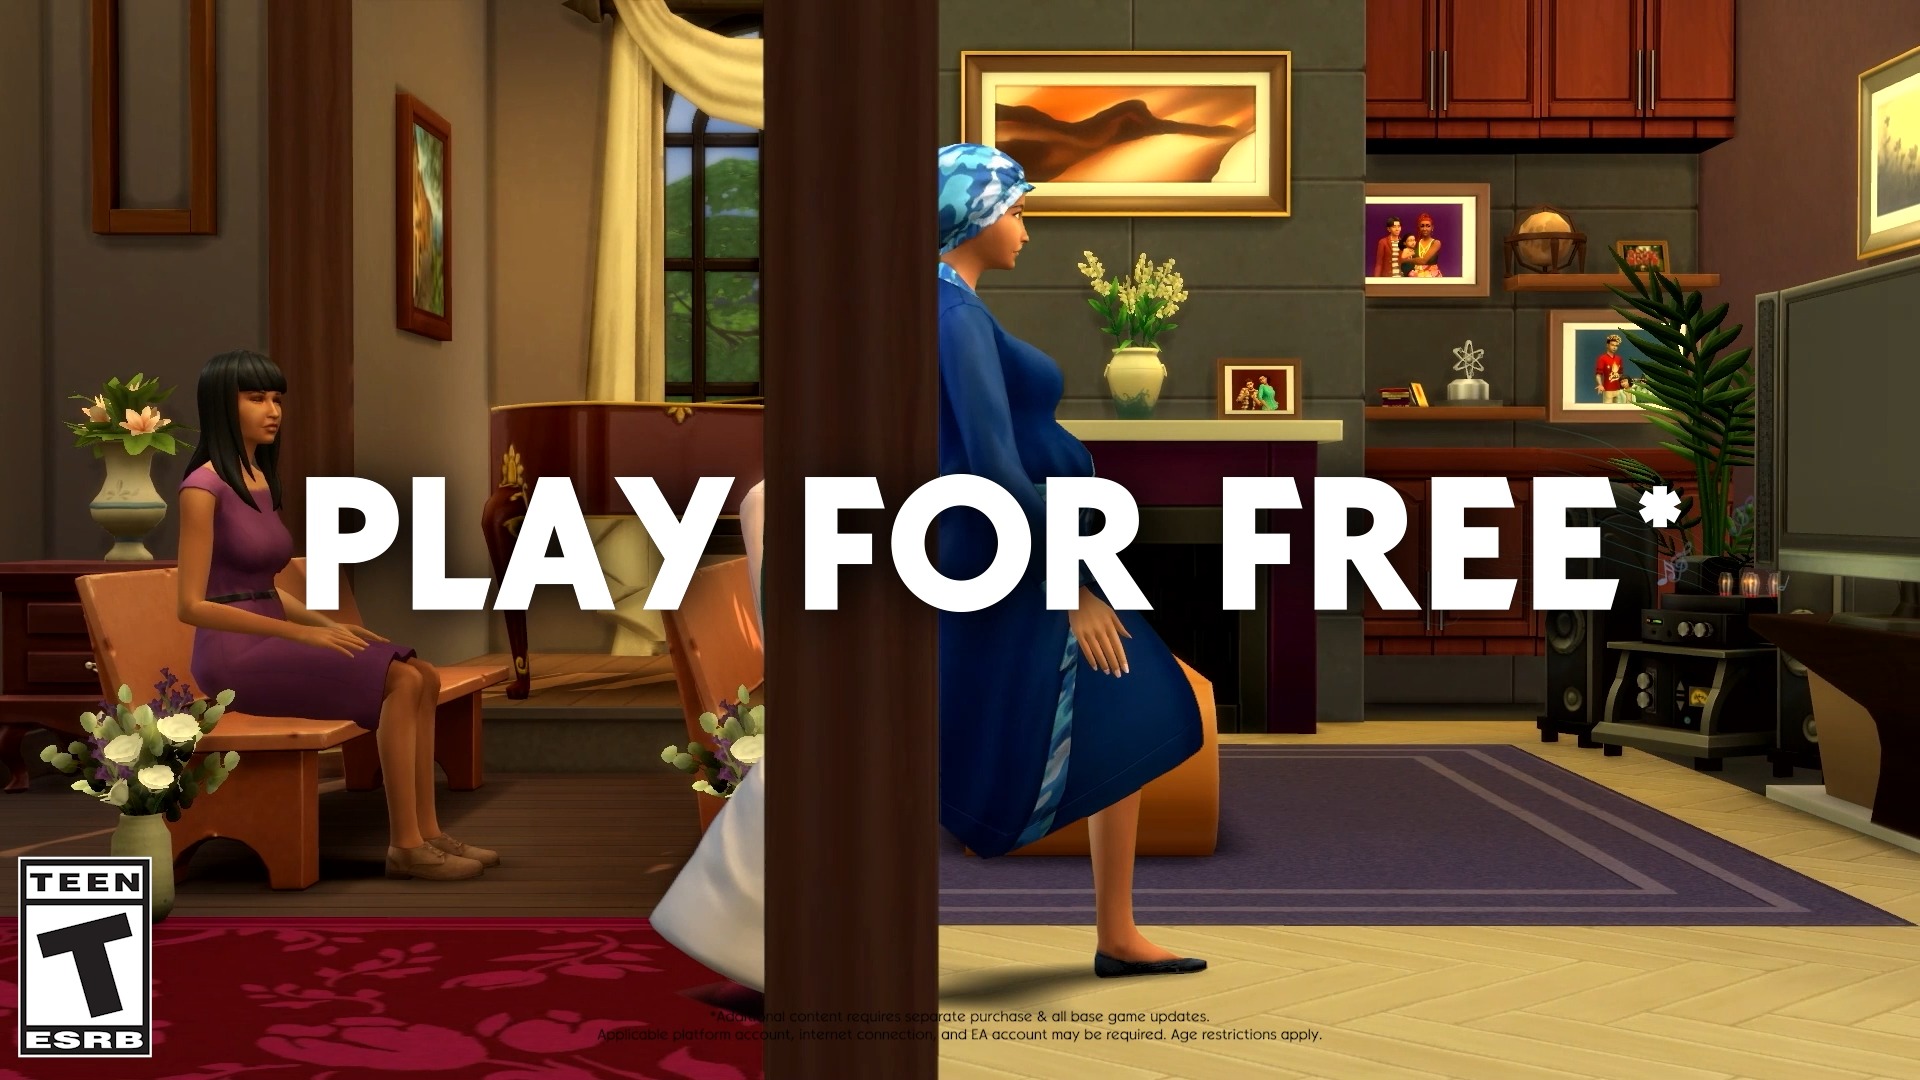 Play The Sims™ 4 EA Play Edition